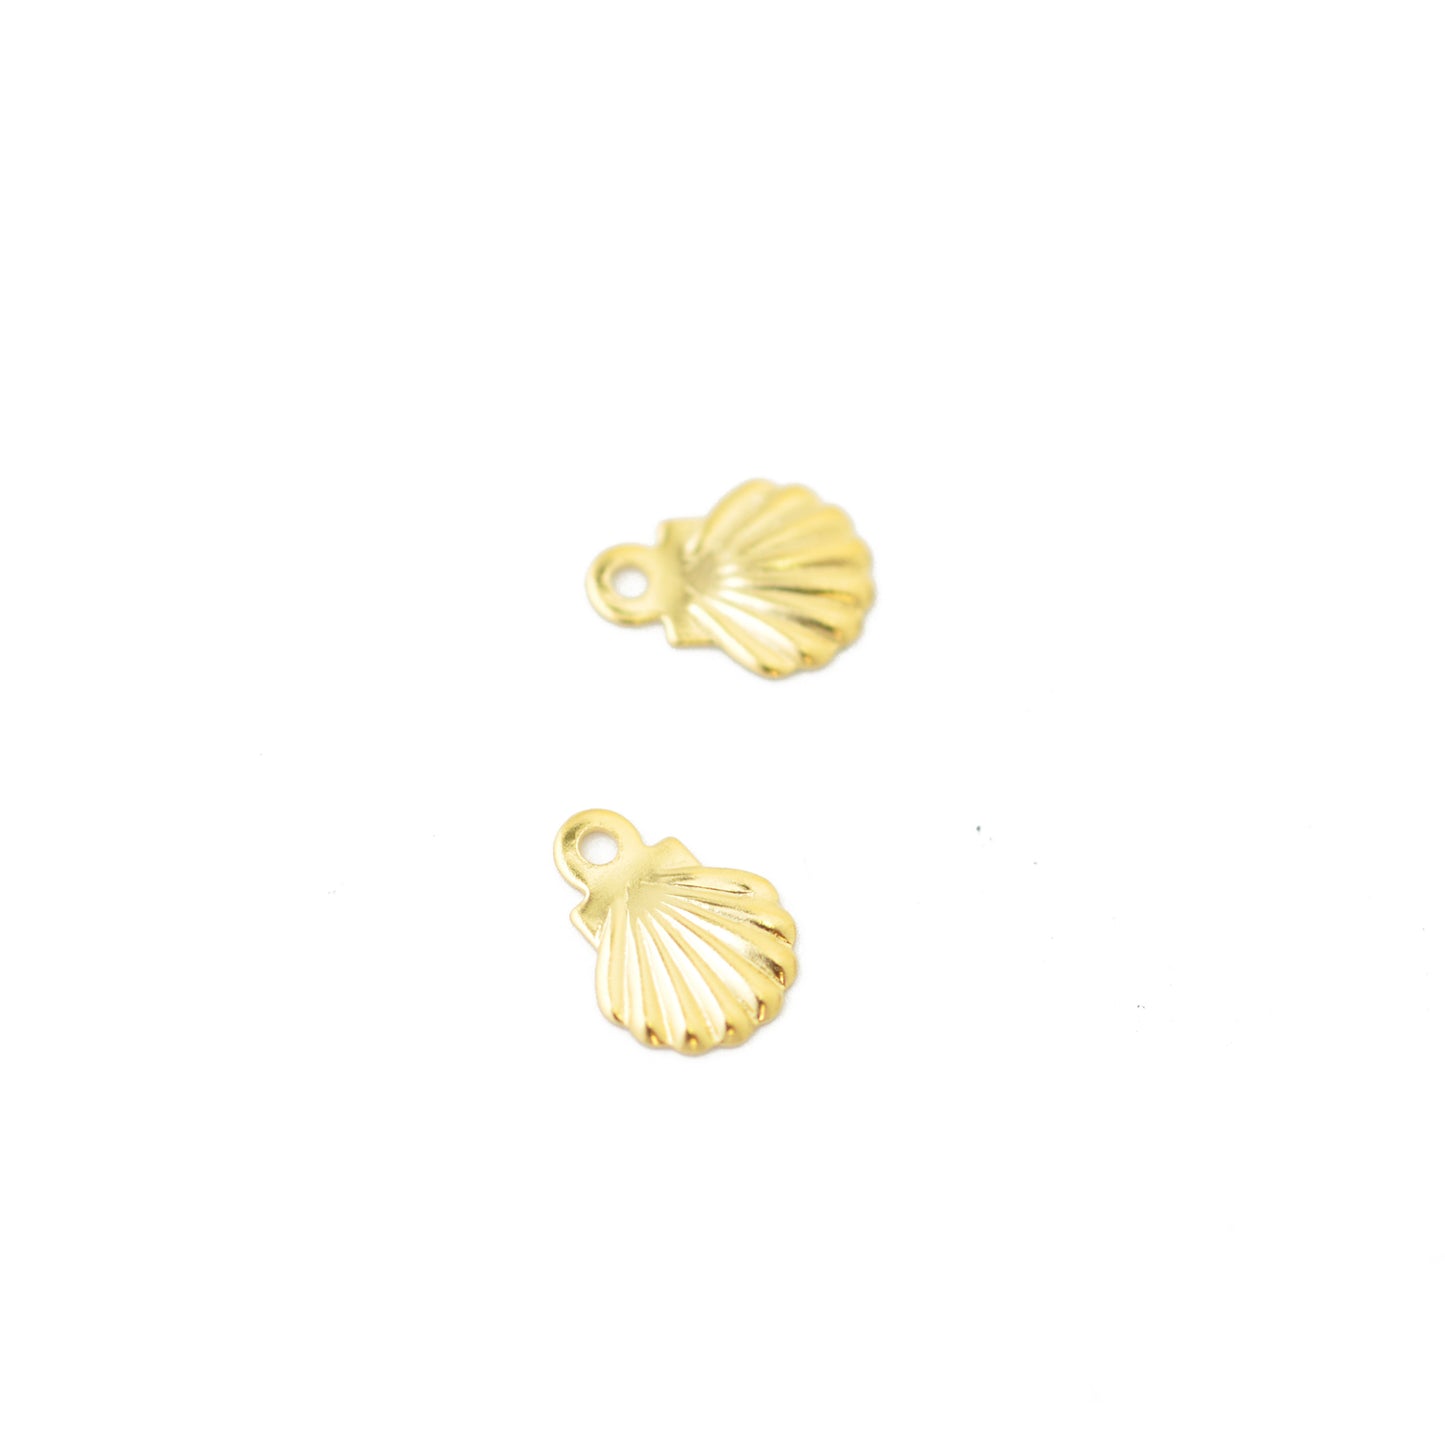 Stainless steel mini pendant / shell gold plated / Ø 7mm